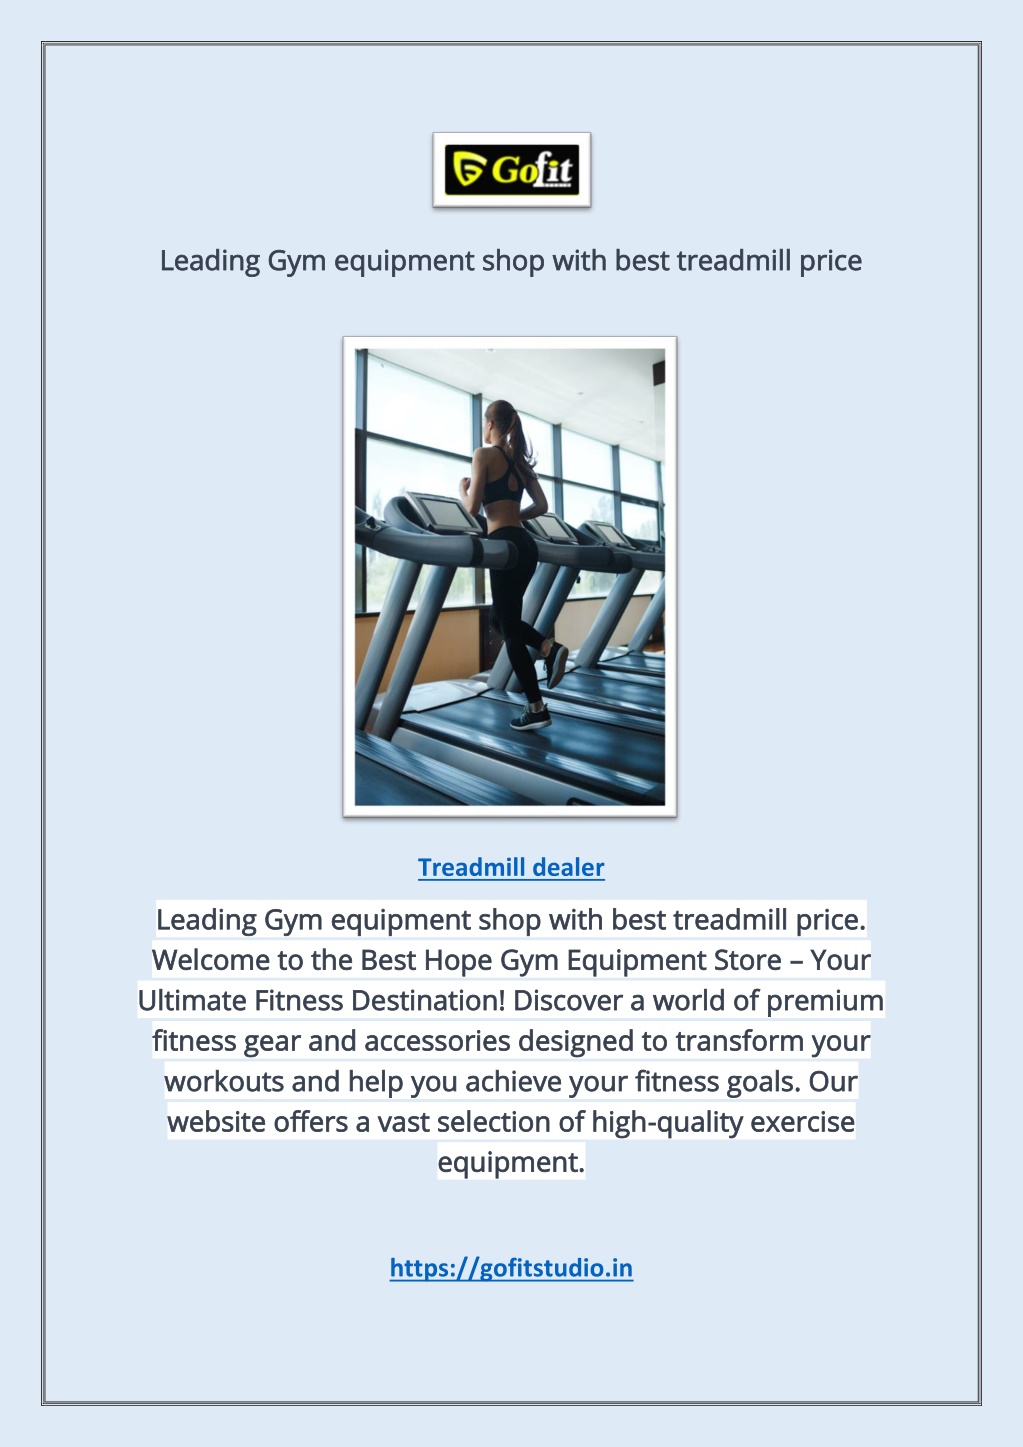 Premium Fitness Clubs at an Affordable Price